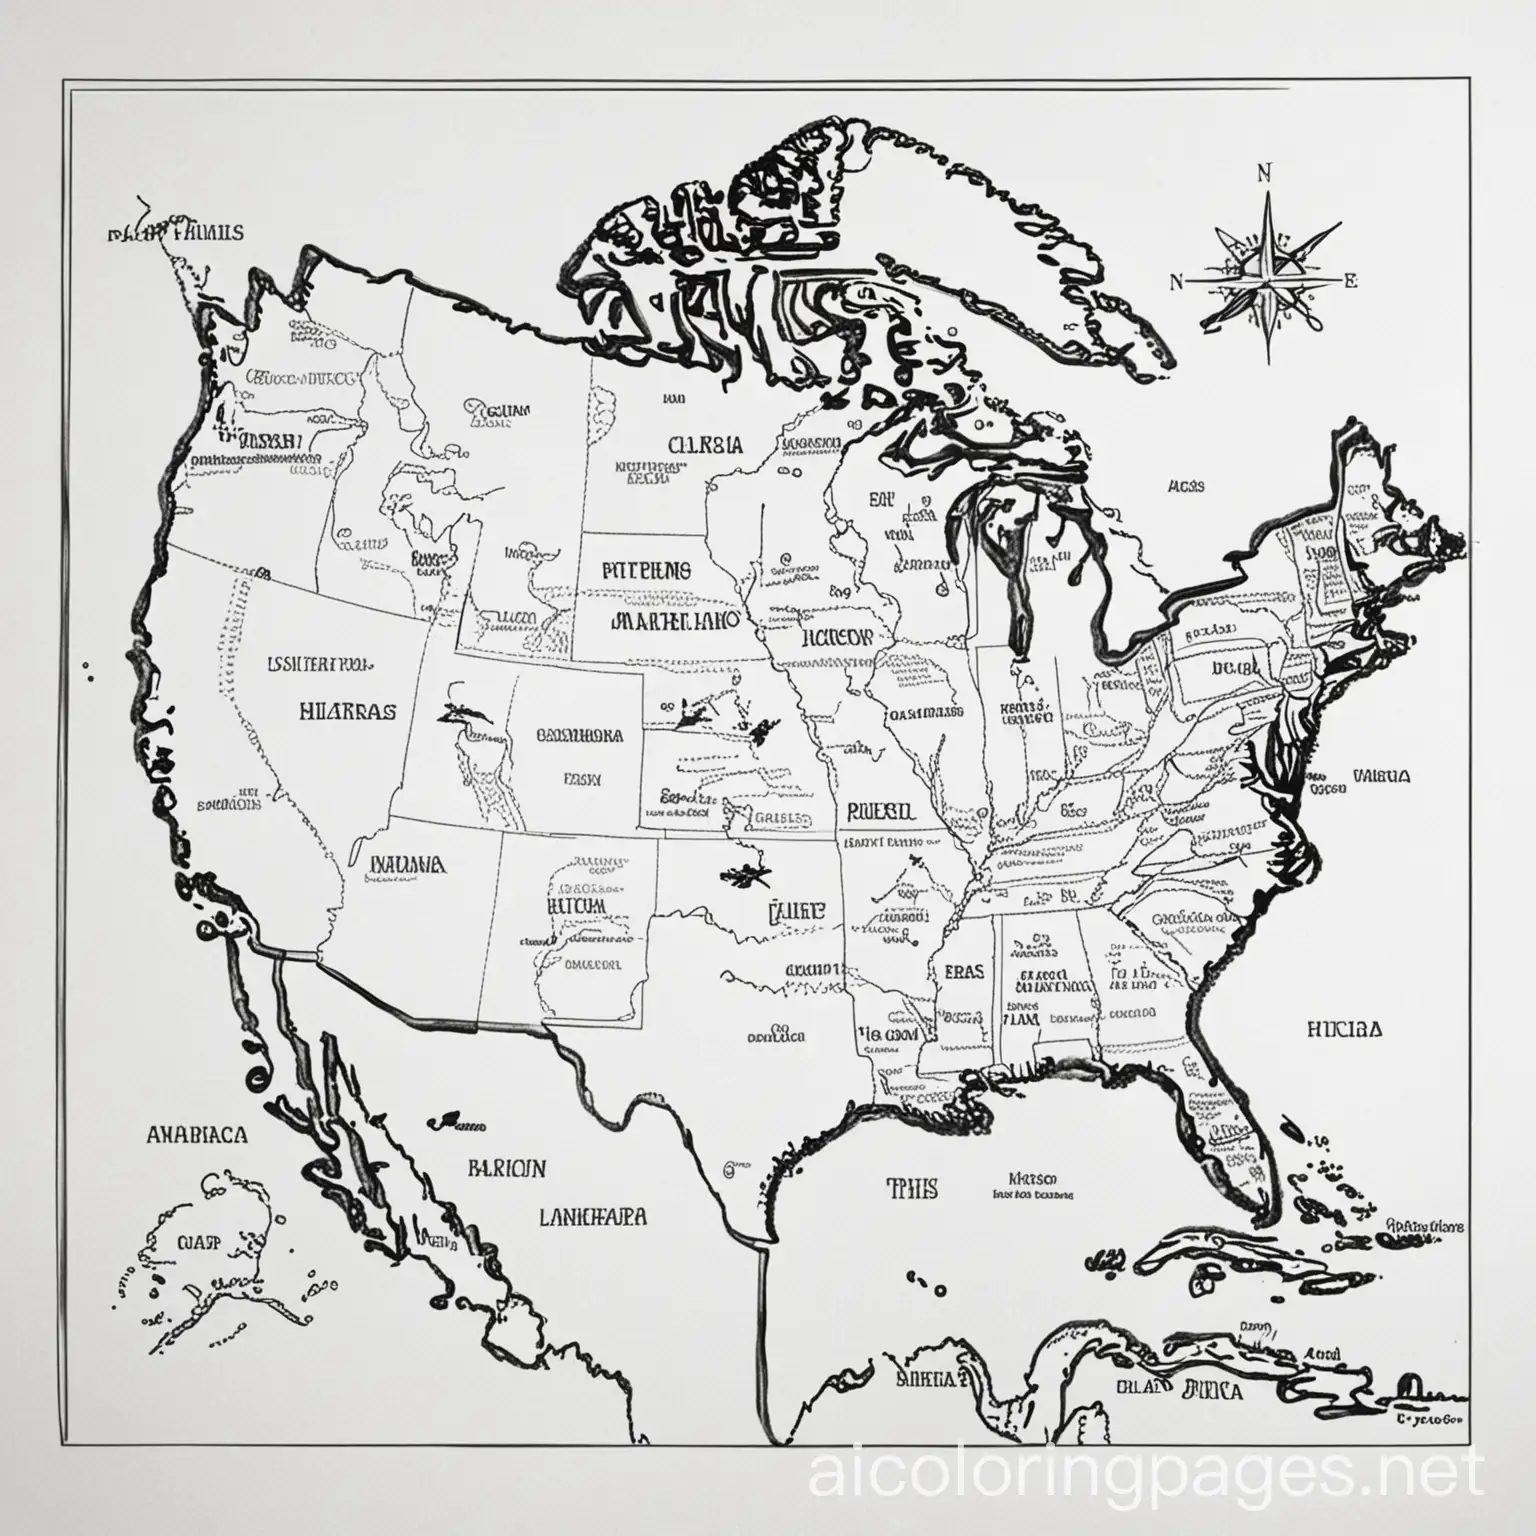 simple map of north america with 10 simple landmarks, Coloring Page, black and white, line art, white background, Simplicity, Ample White Space. The background of the coloring page is plain white to make it easy for young children to color within the lines. The outlines of all the subjects are easy to distinguish, making it simple for kids to color without too much difficulty